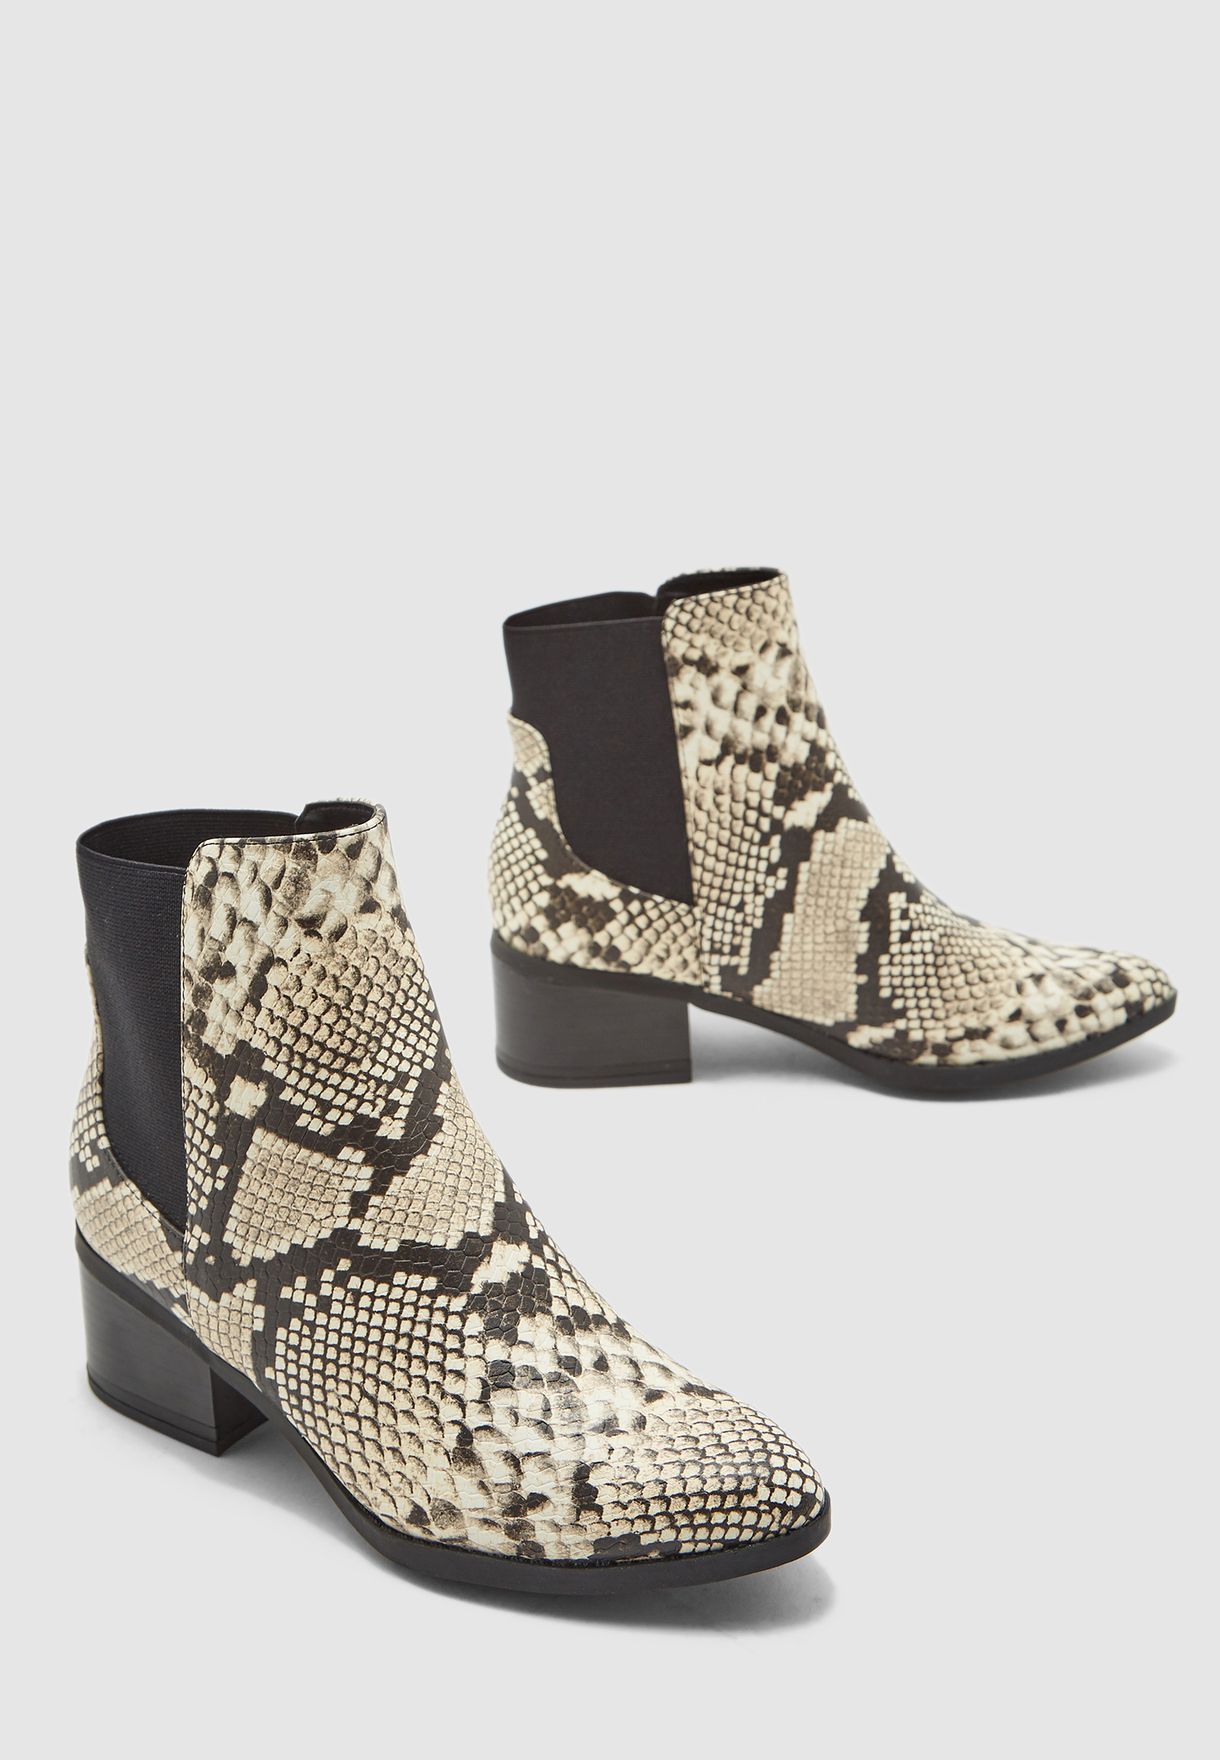 call it spring boots womens